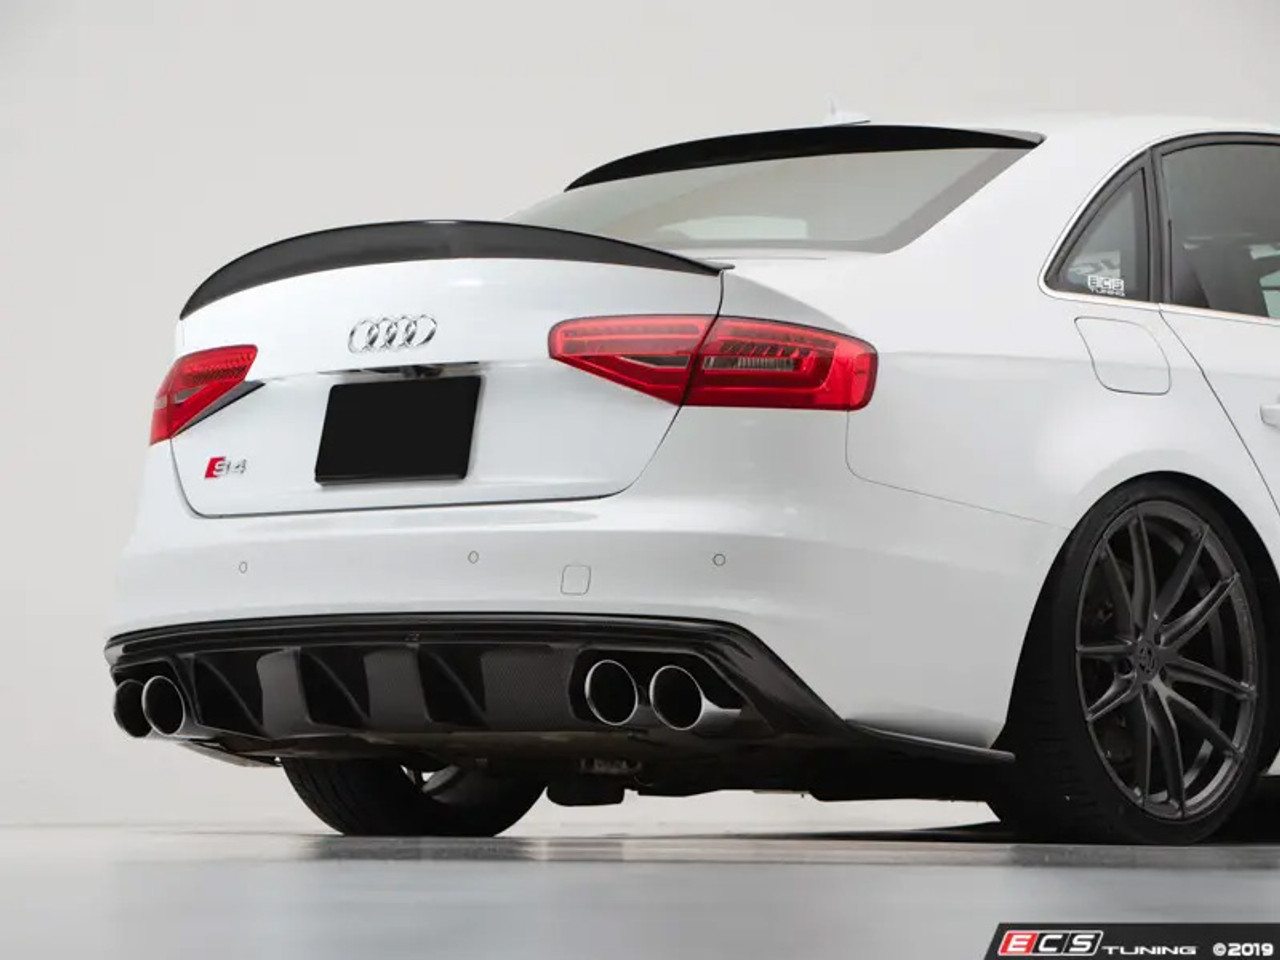 ECS Tuning Gloss Black Boot Spoiler - A4/S4 B8/B8.5 - Awesome GTI -  Volkswagen Audi Group Specialists